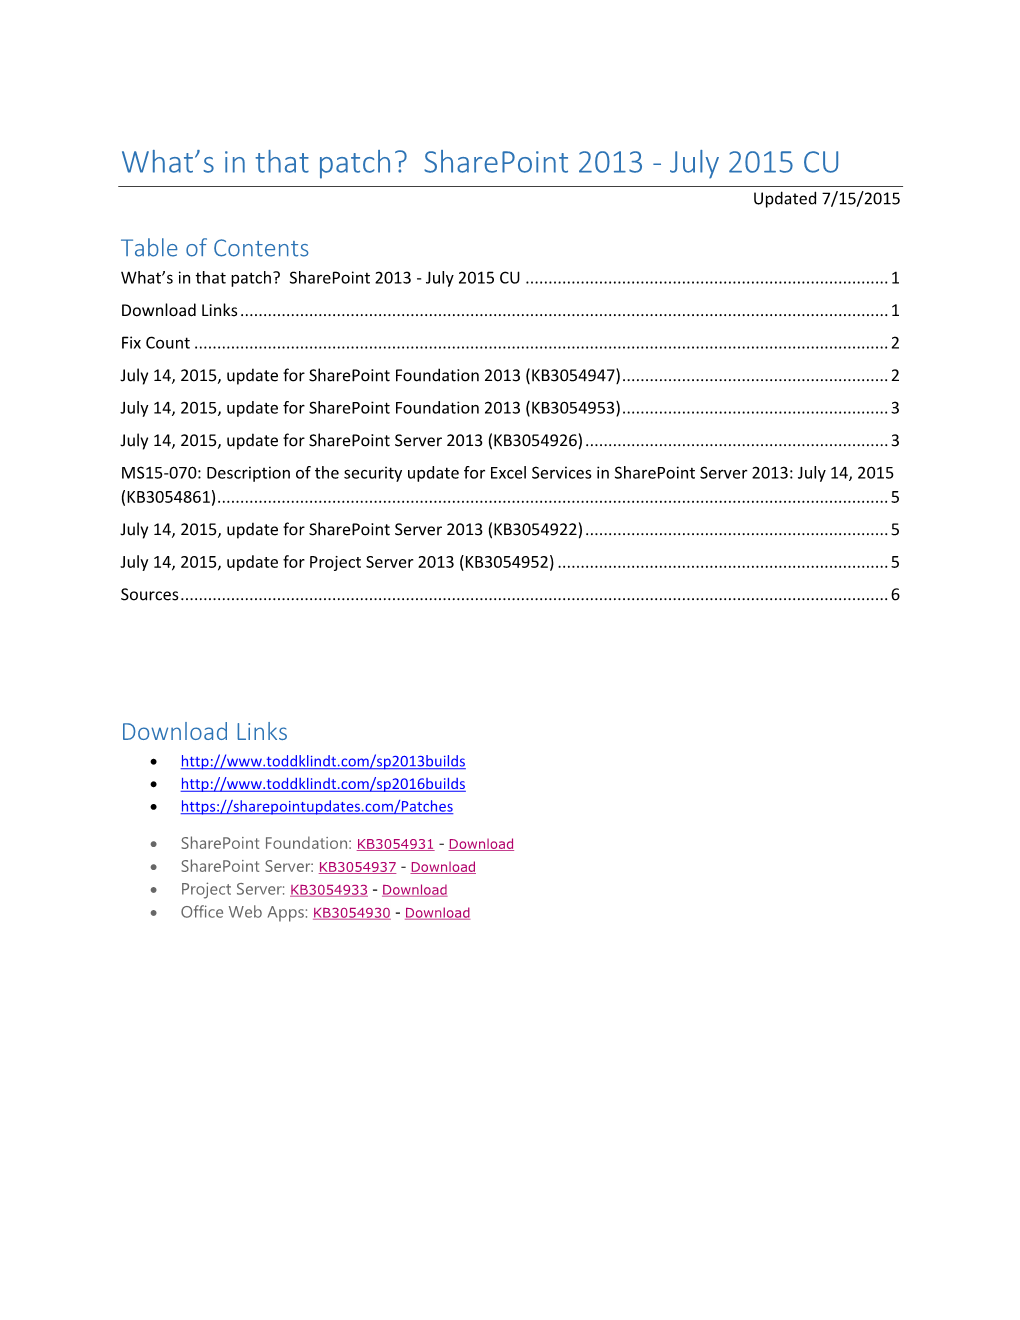 What's in That Patch? Sharepoint 2013